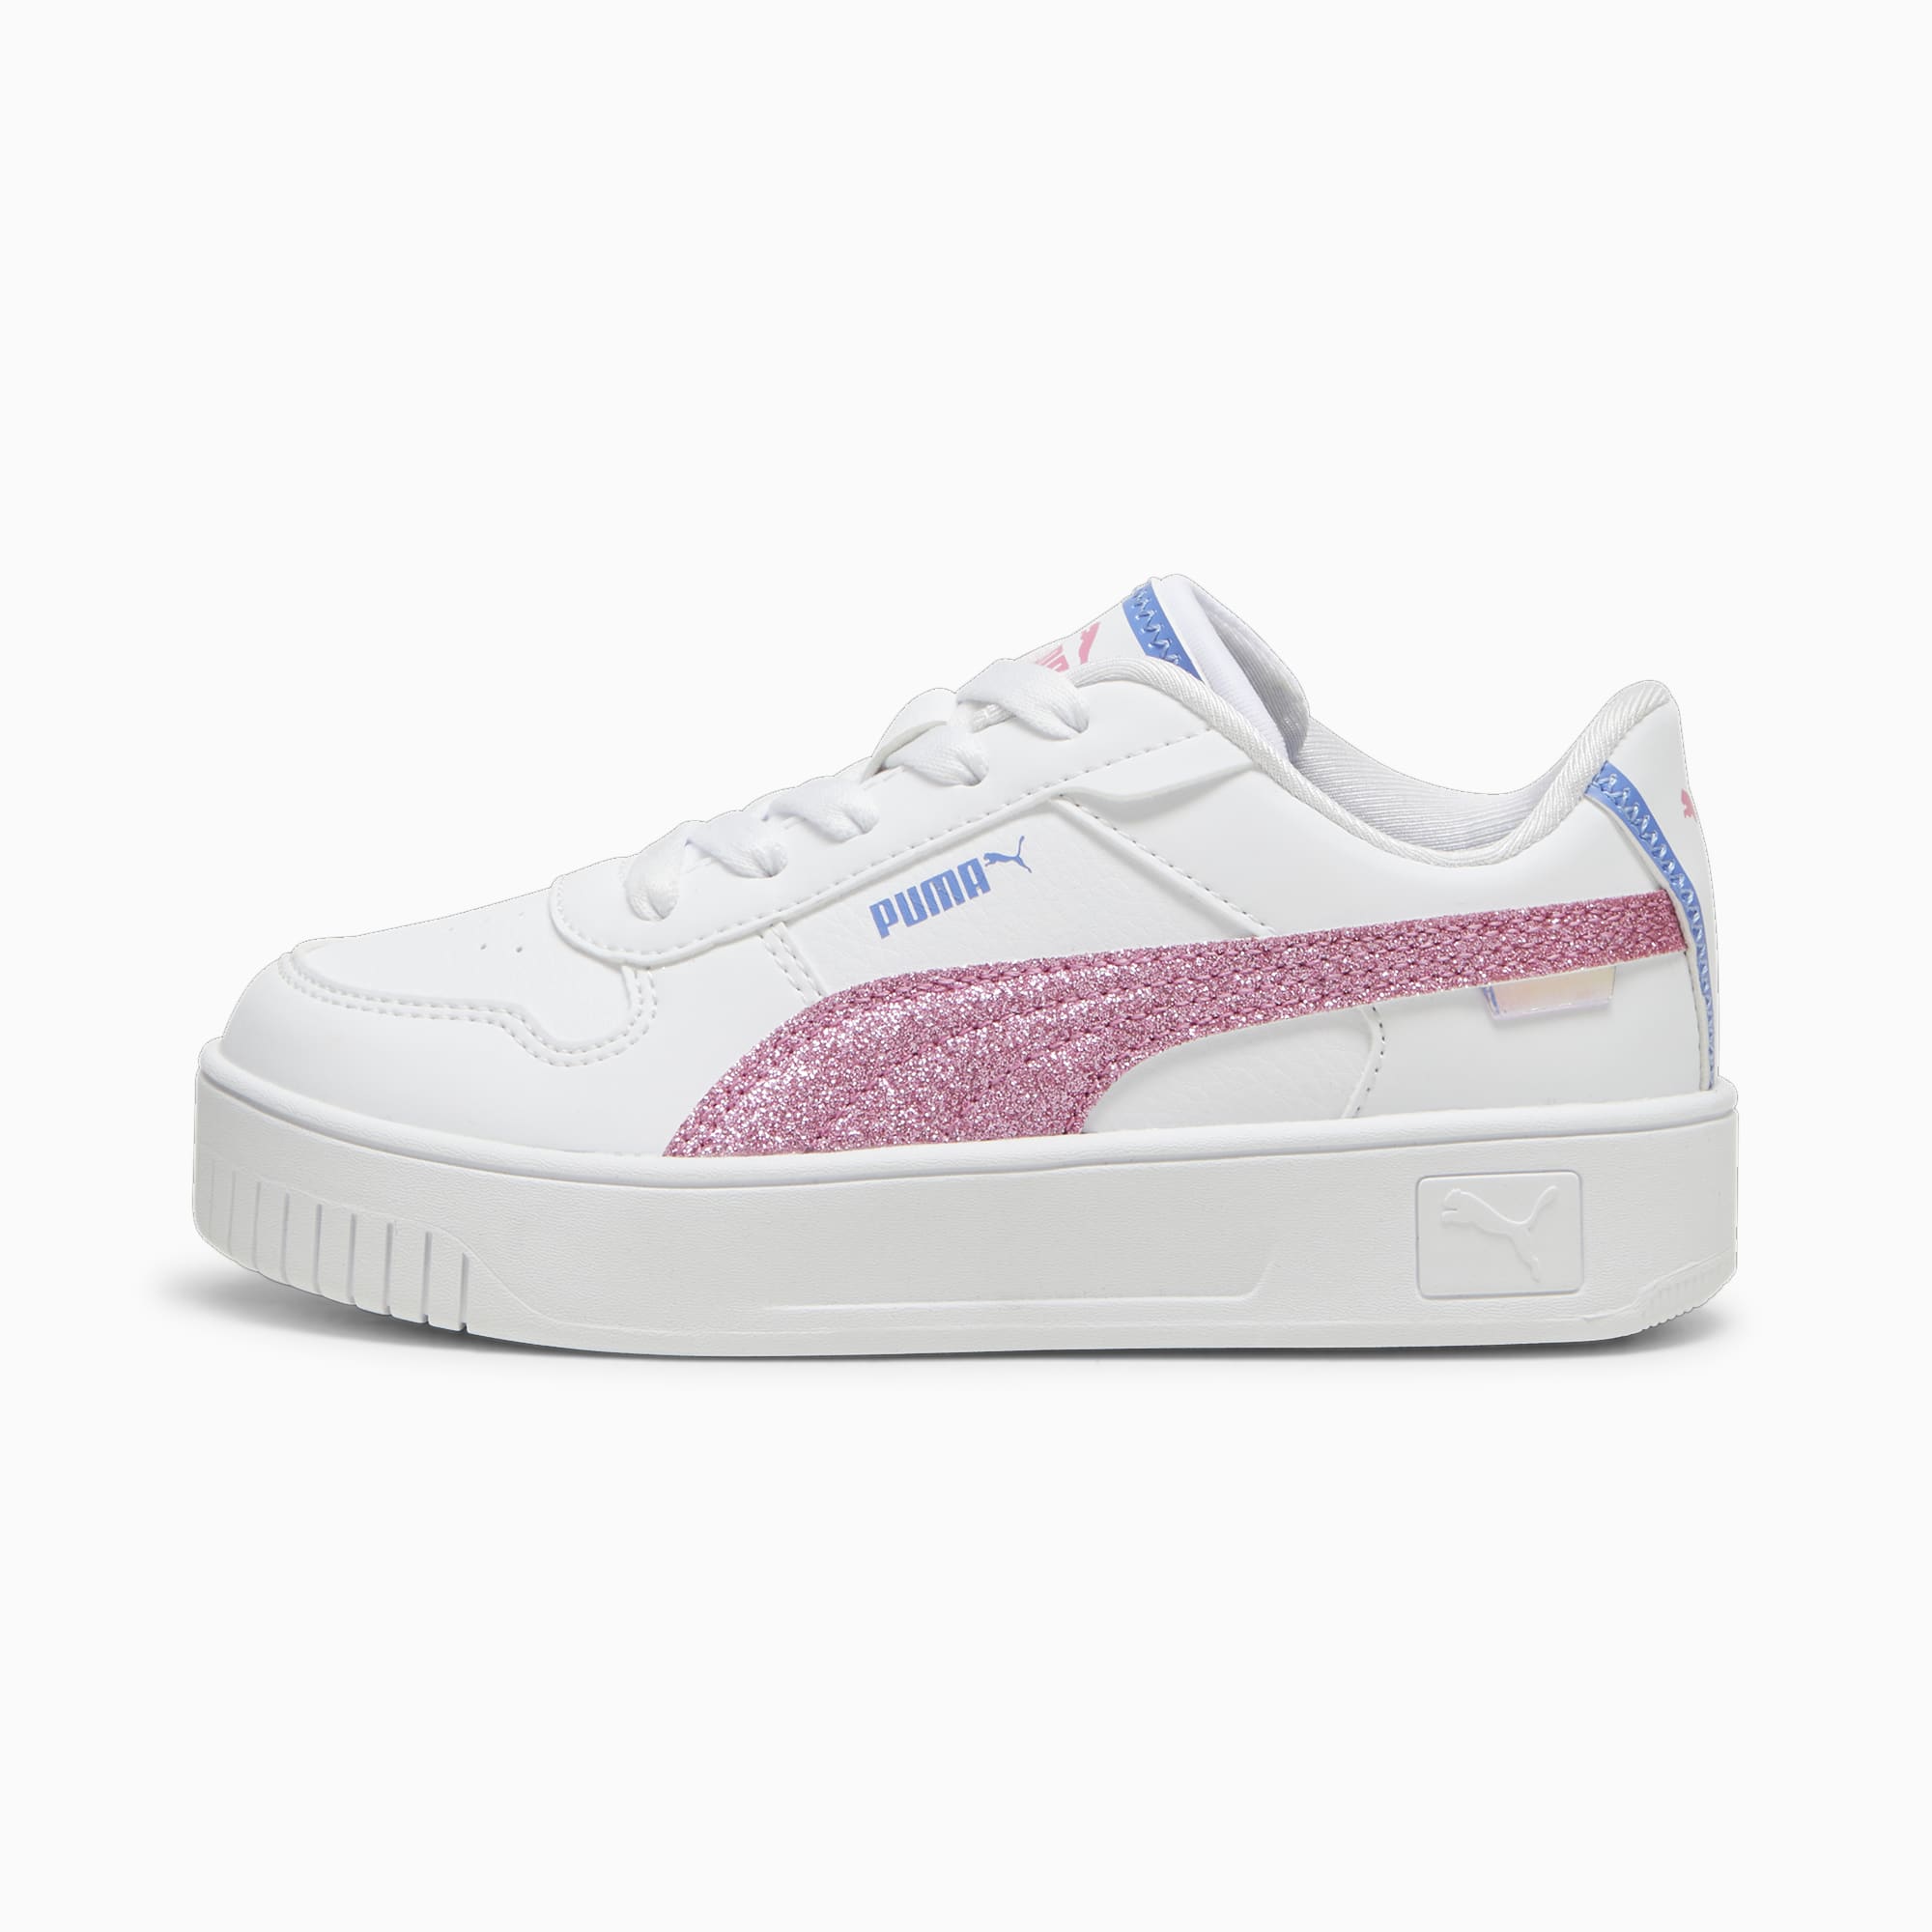 PUMA Carina Street Deep Dive Kids' Sneakers, White/Fast Pink/Blue Skies, Size 27,5, Shoes